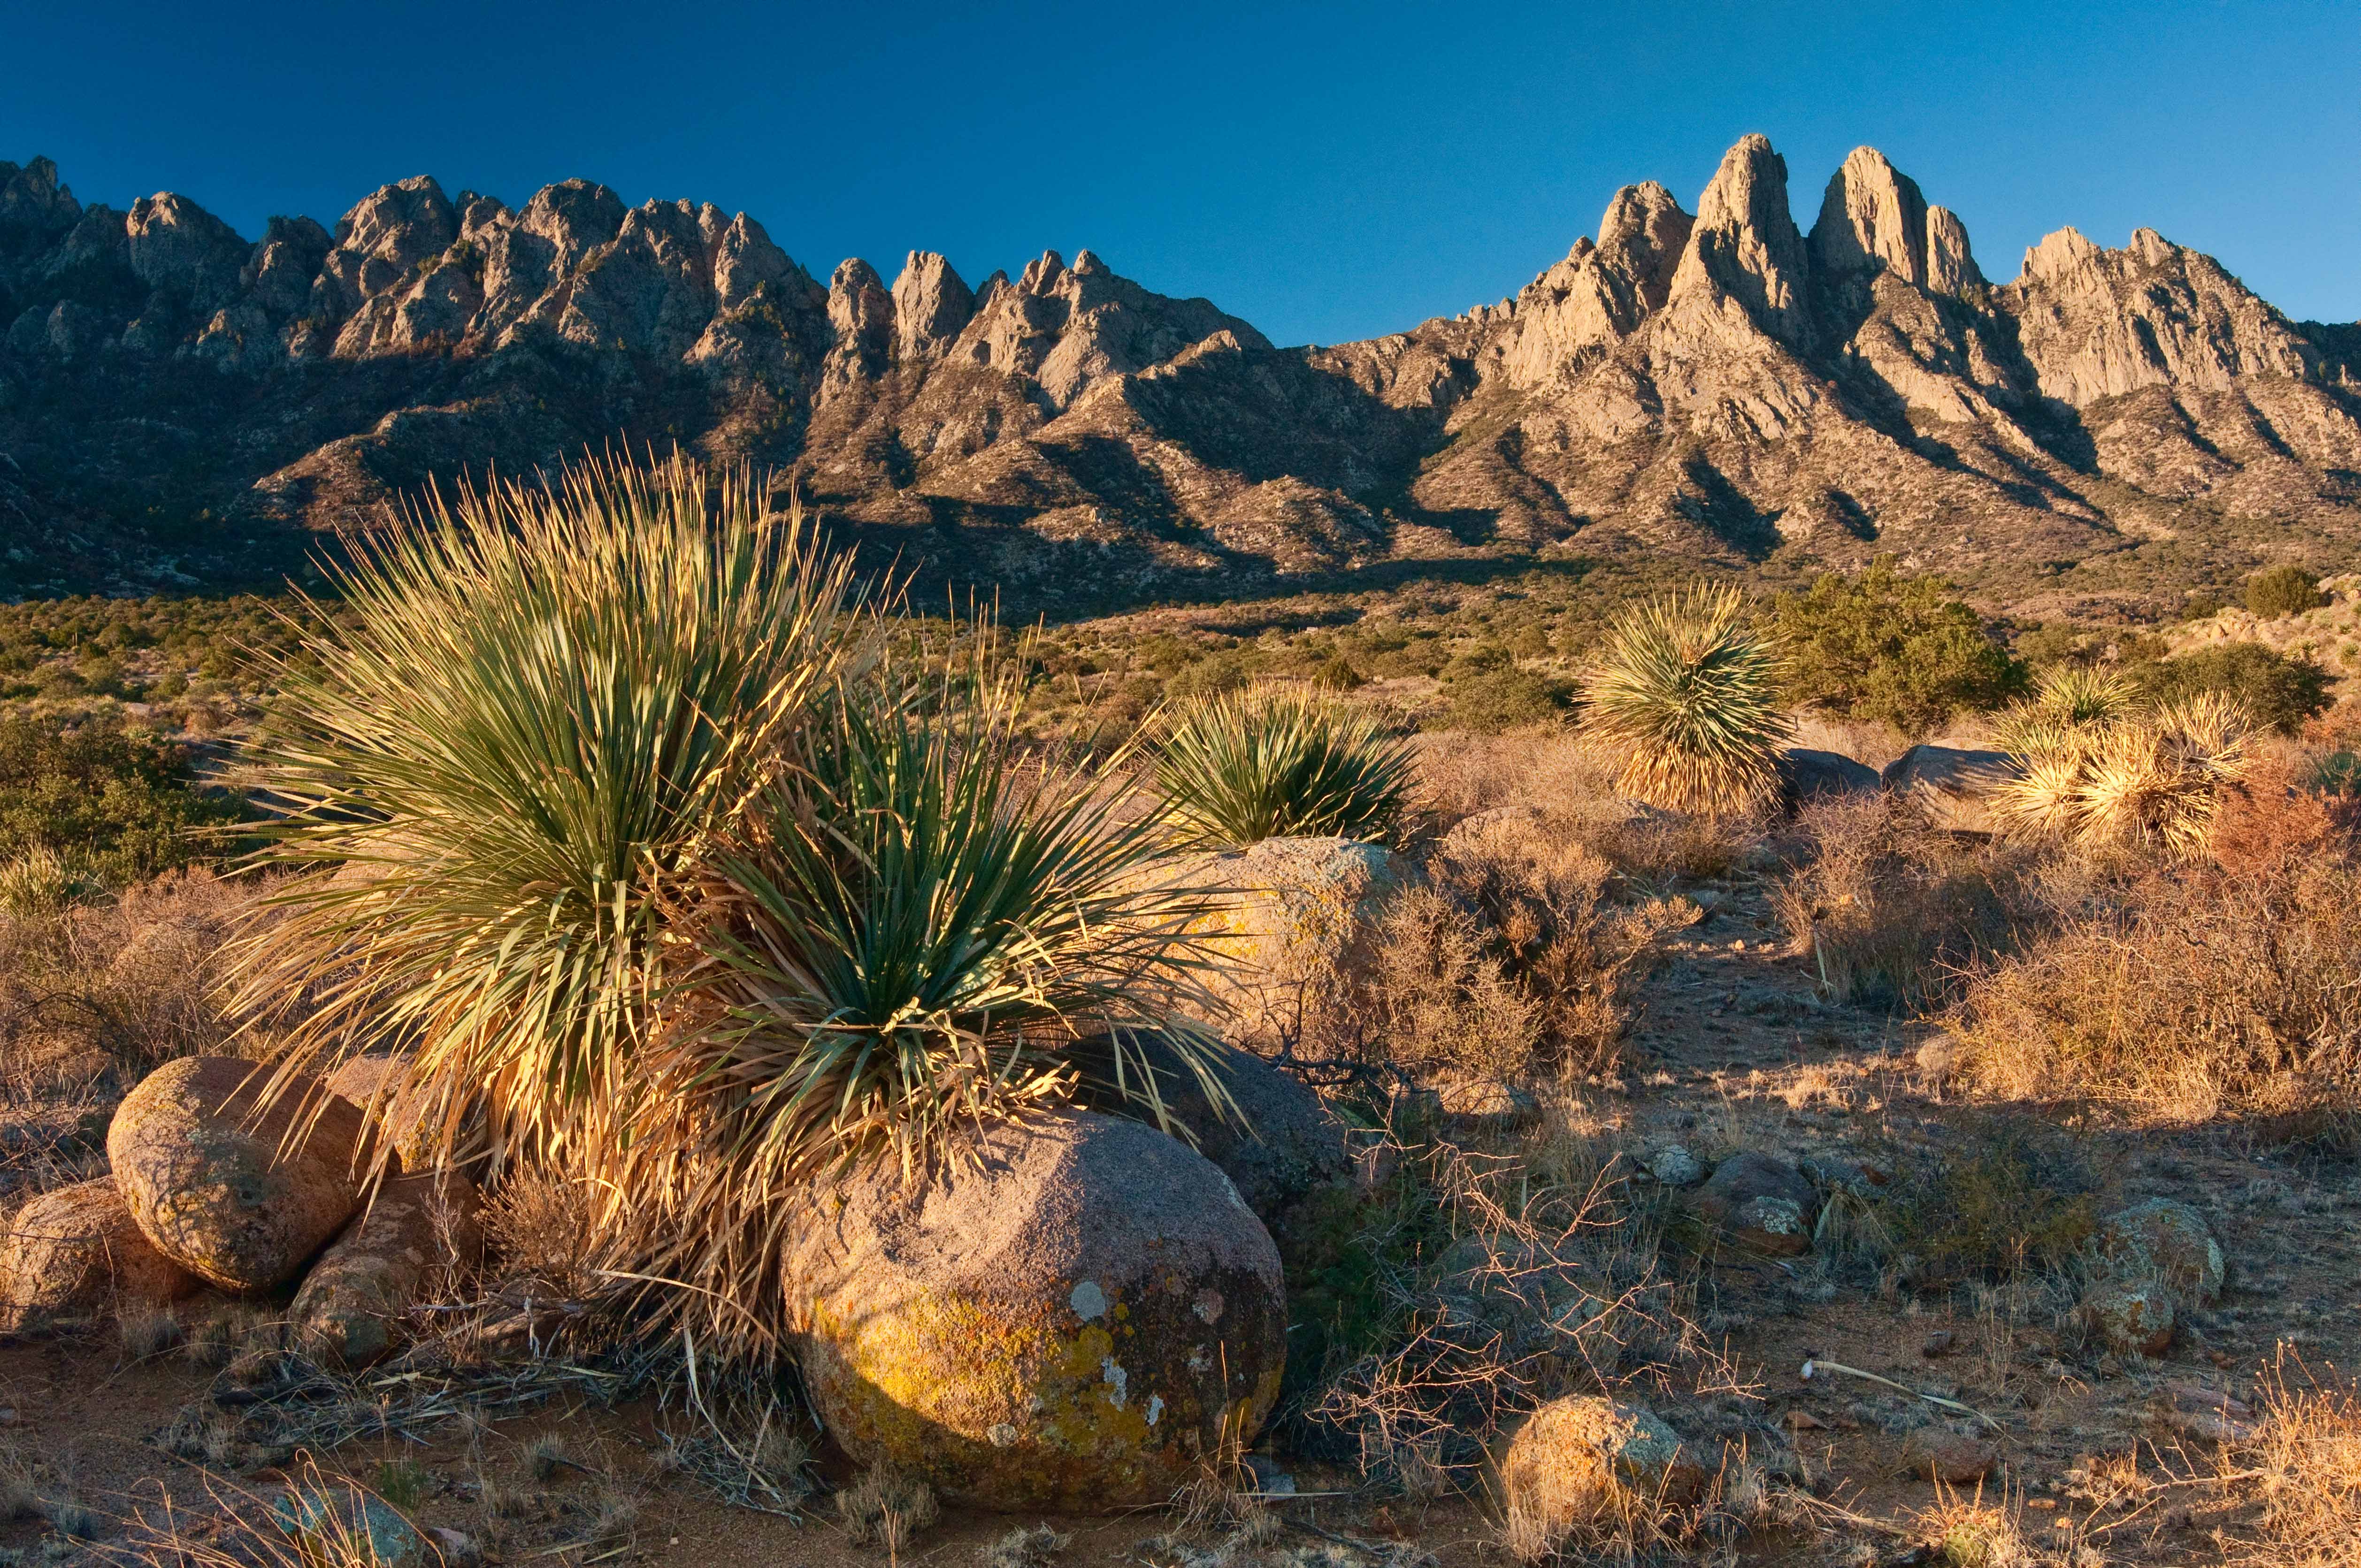 The Organ Mountains gained notoriety in 2014 when they became part of Organ Mountains-Desert Peaks National Monument © Witold Skrypczak / Lonely Planet Images / Getty